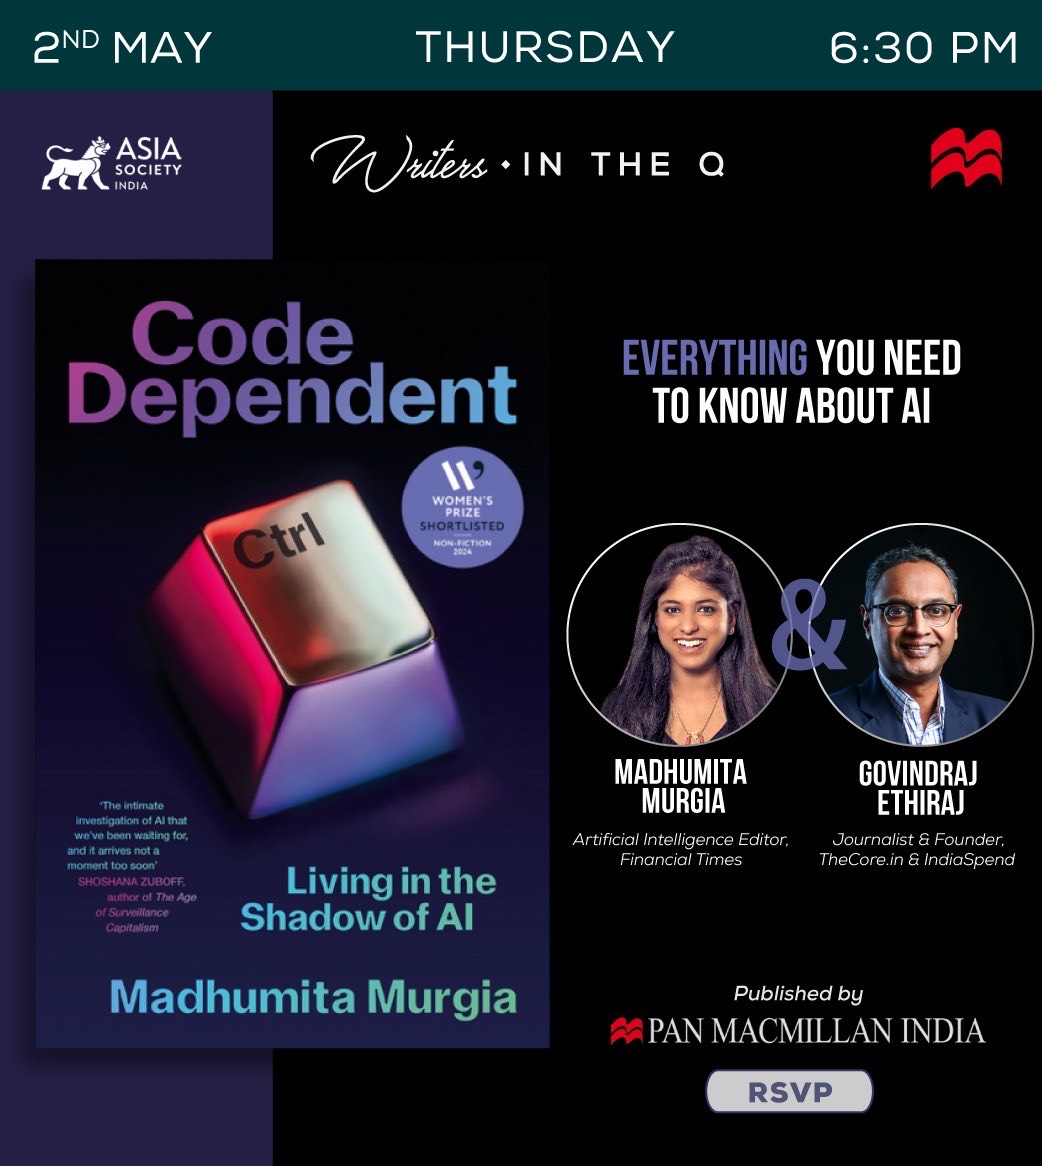 Join us at @TheQuorumClub on 2 May at 6:30 pm for the much-awaited Mumbai launch of CODE DEPENDENT: Living in the Shadow of AI by @madhumita29! She will be in conversation with @govindethiraj. @AsiaSocietyIC RSVP here: forms.gle/xQRwjRo5iZ1kjG…